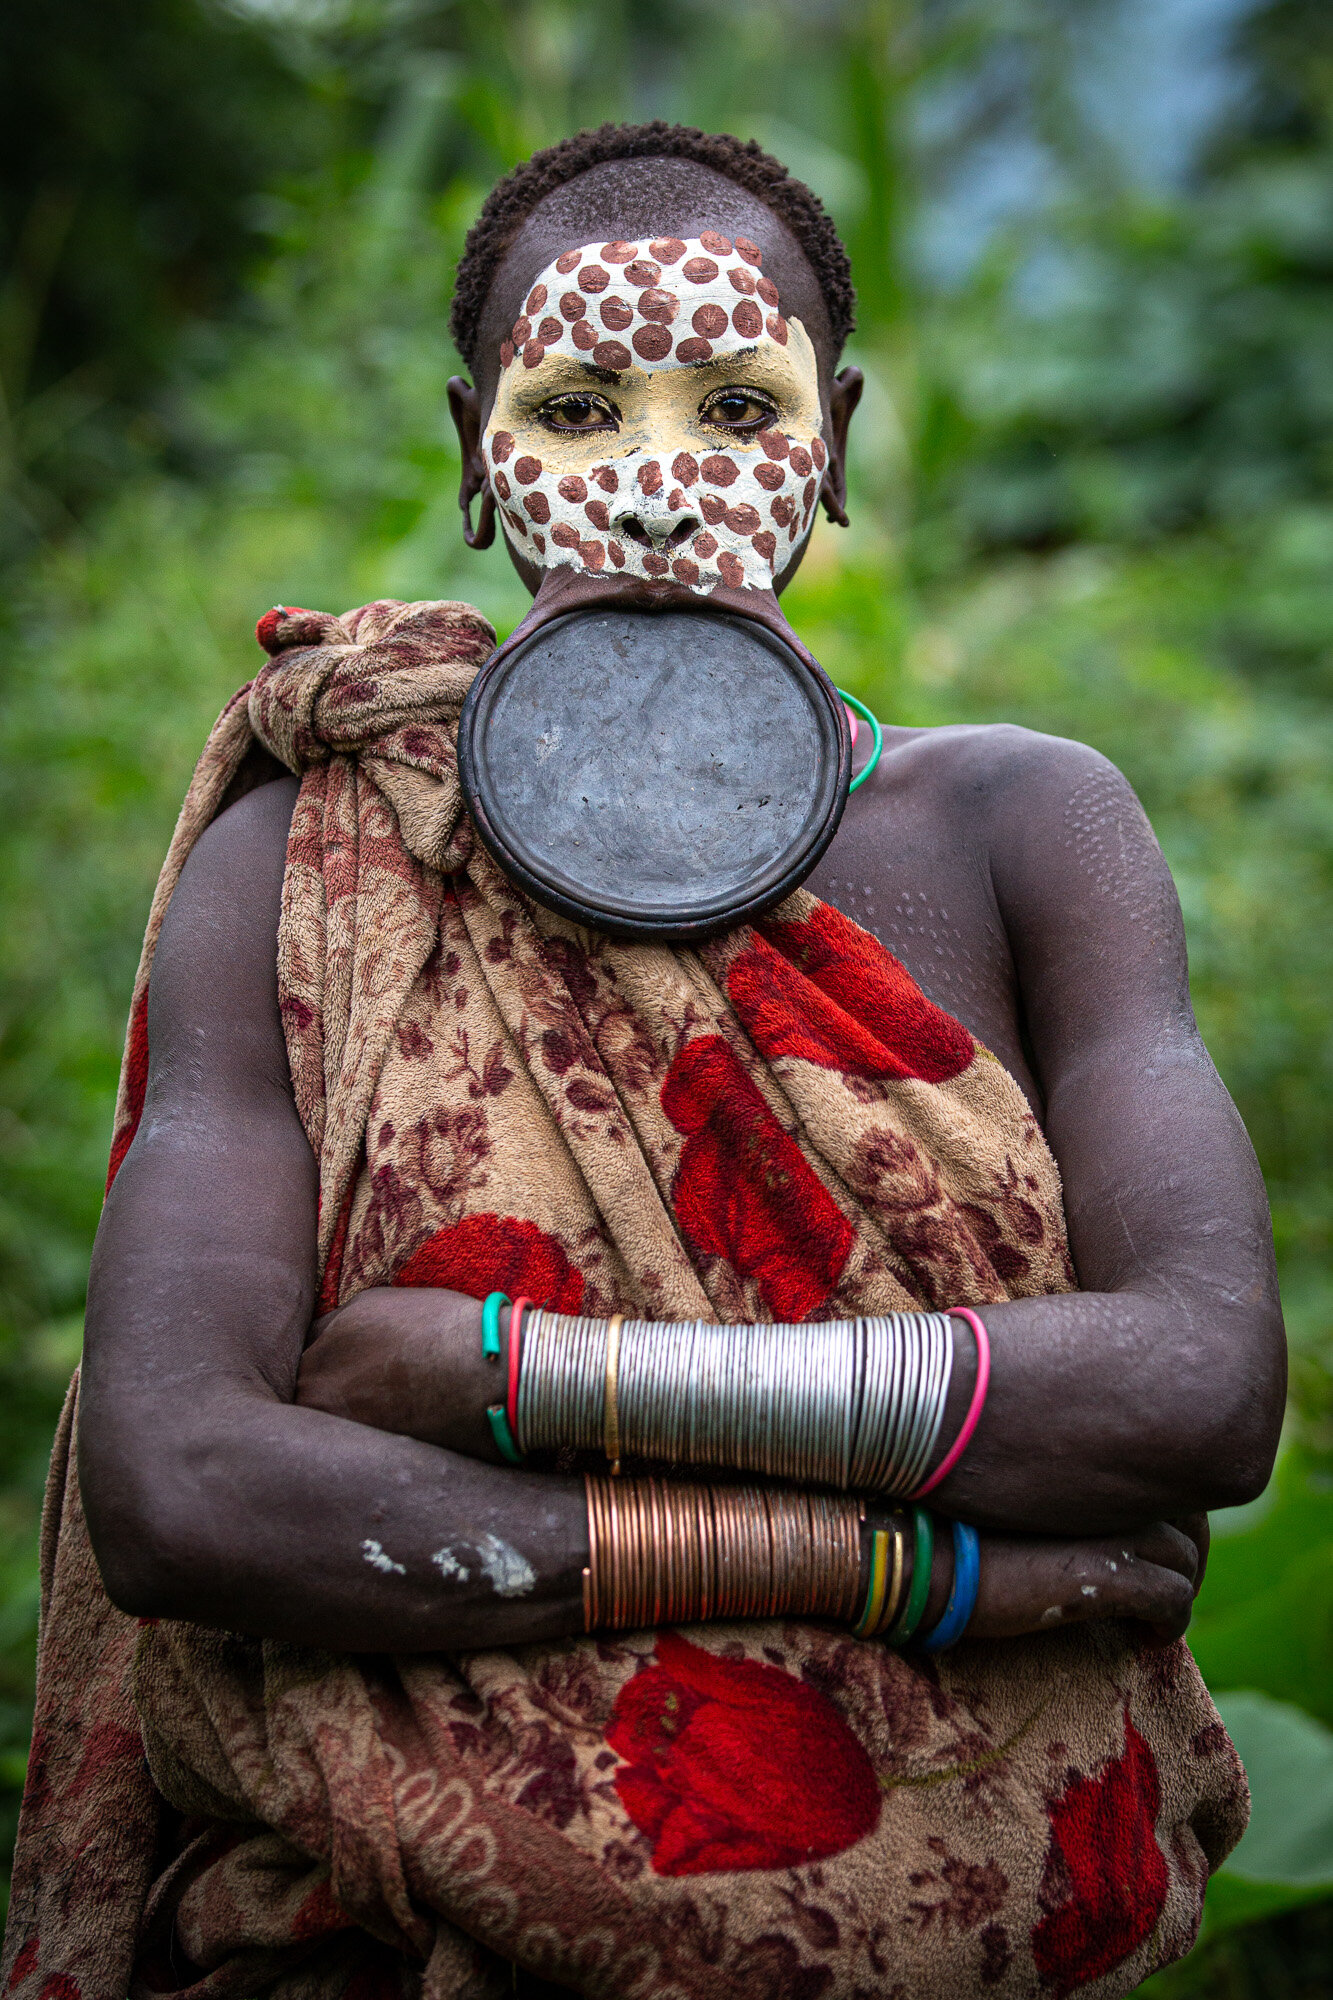 List of African tribal face paint designs and ideas for 2021 